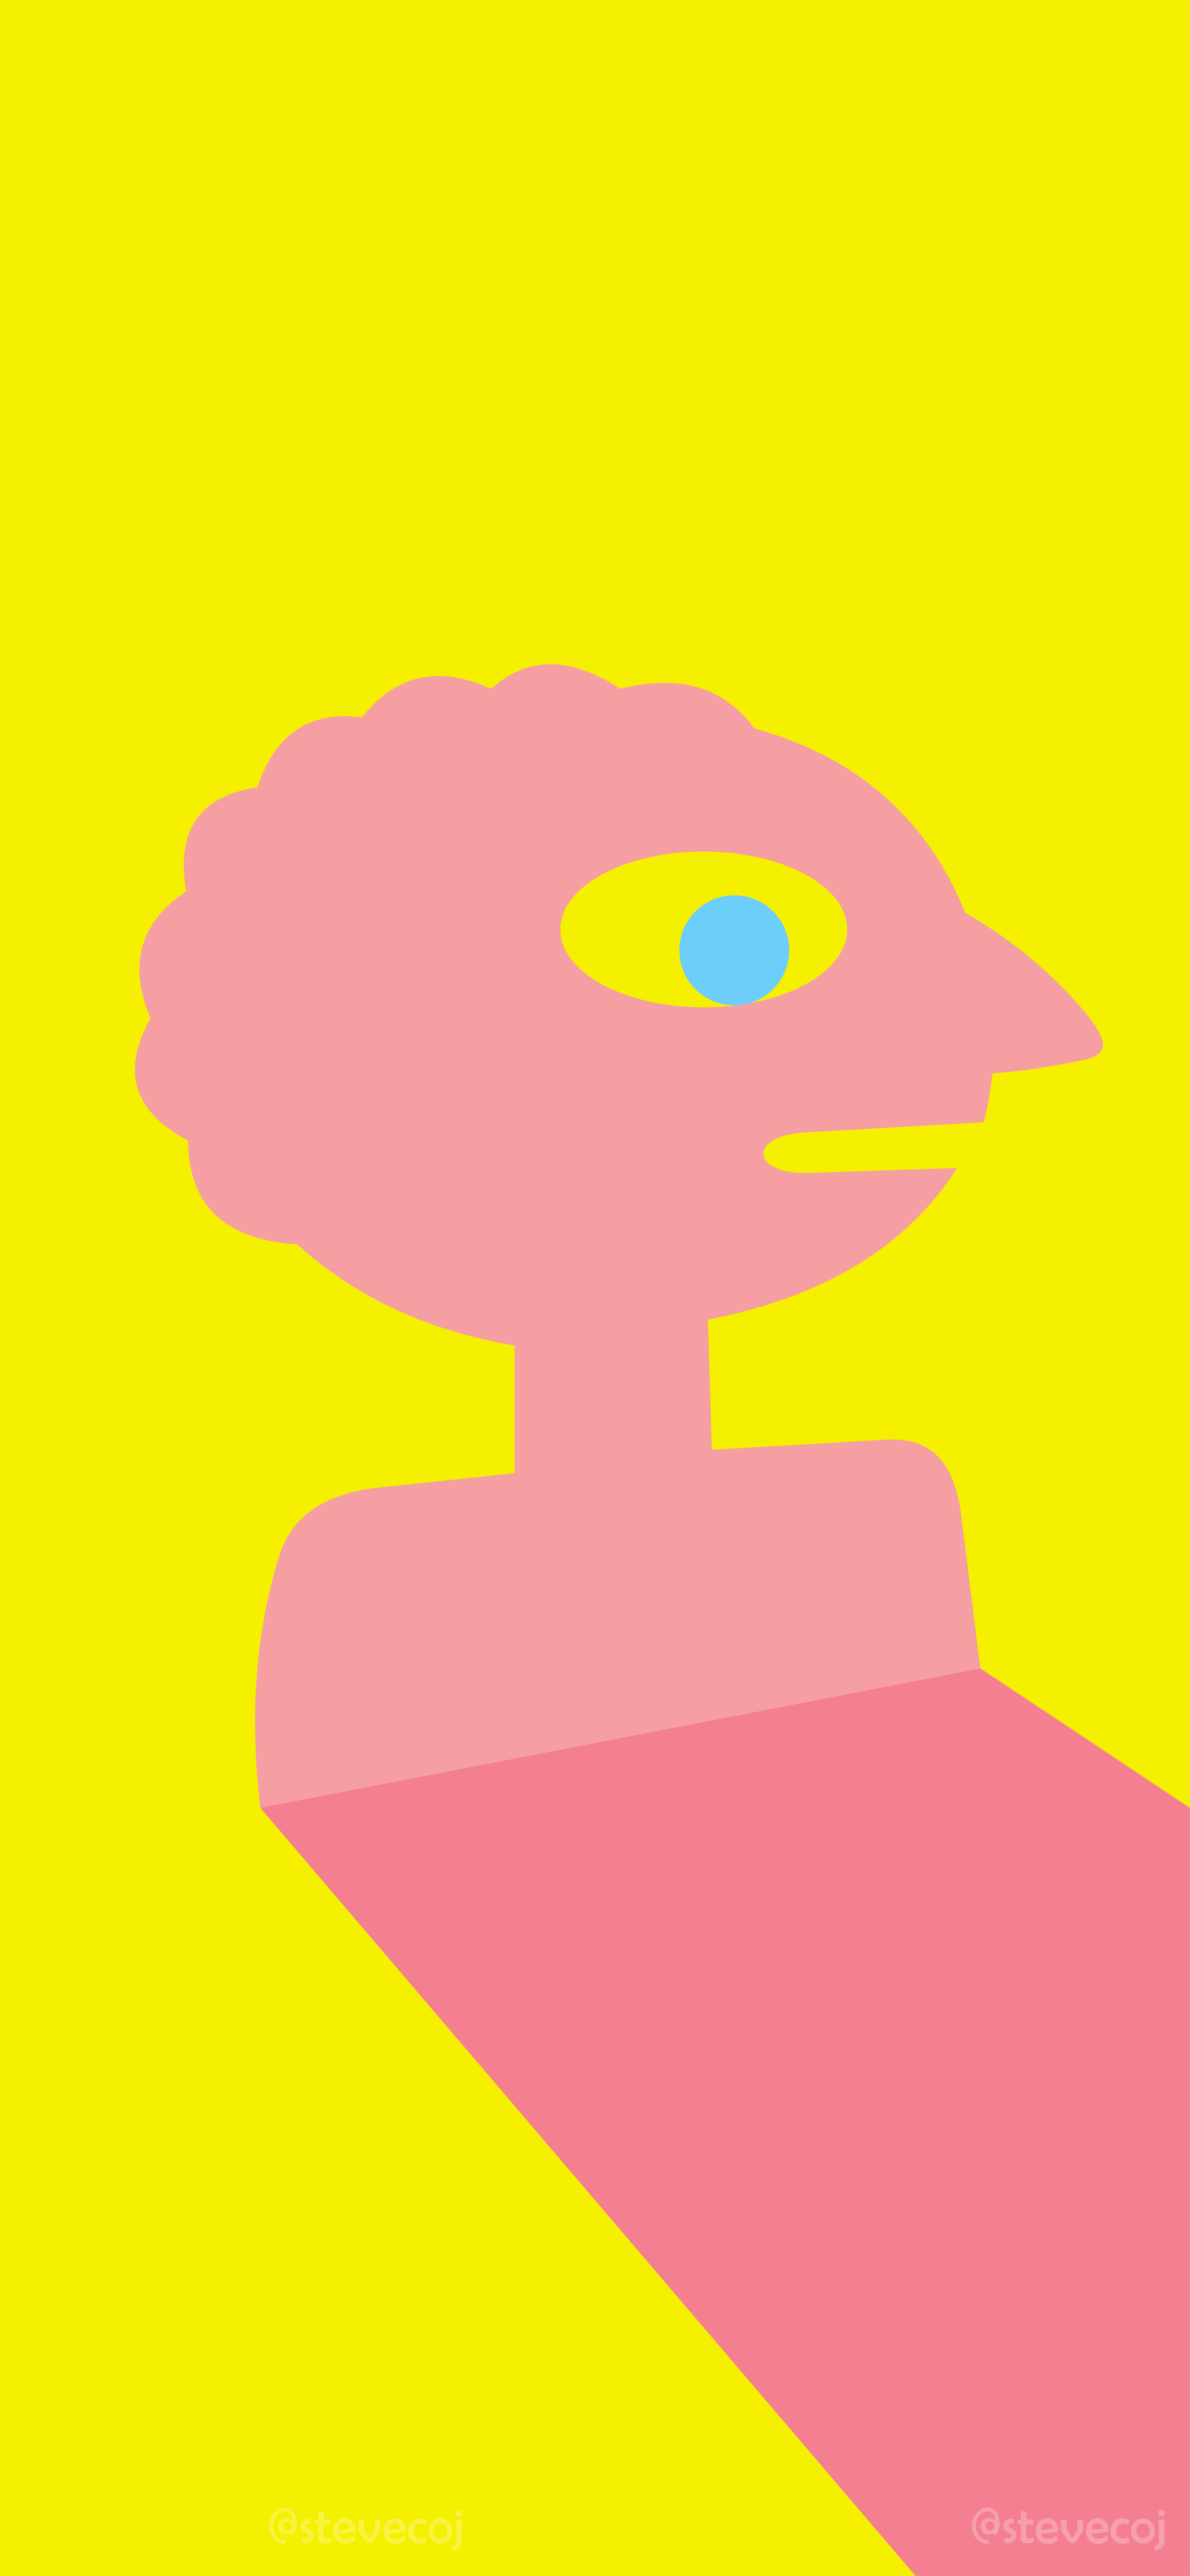 Minimalist art of a pink person on a yellow background - Adventure Time